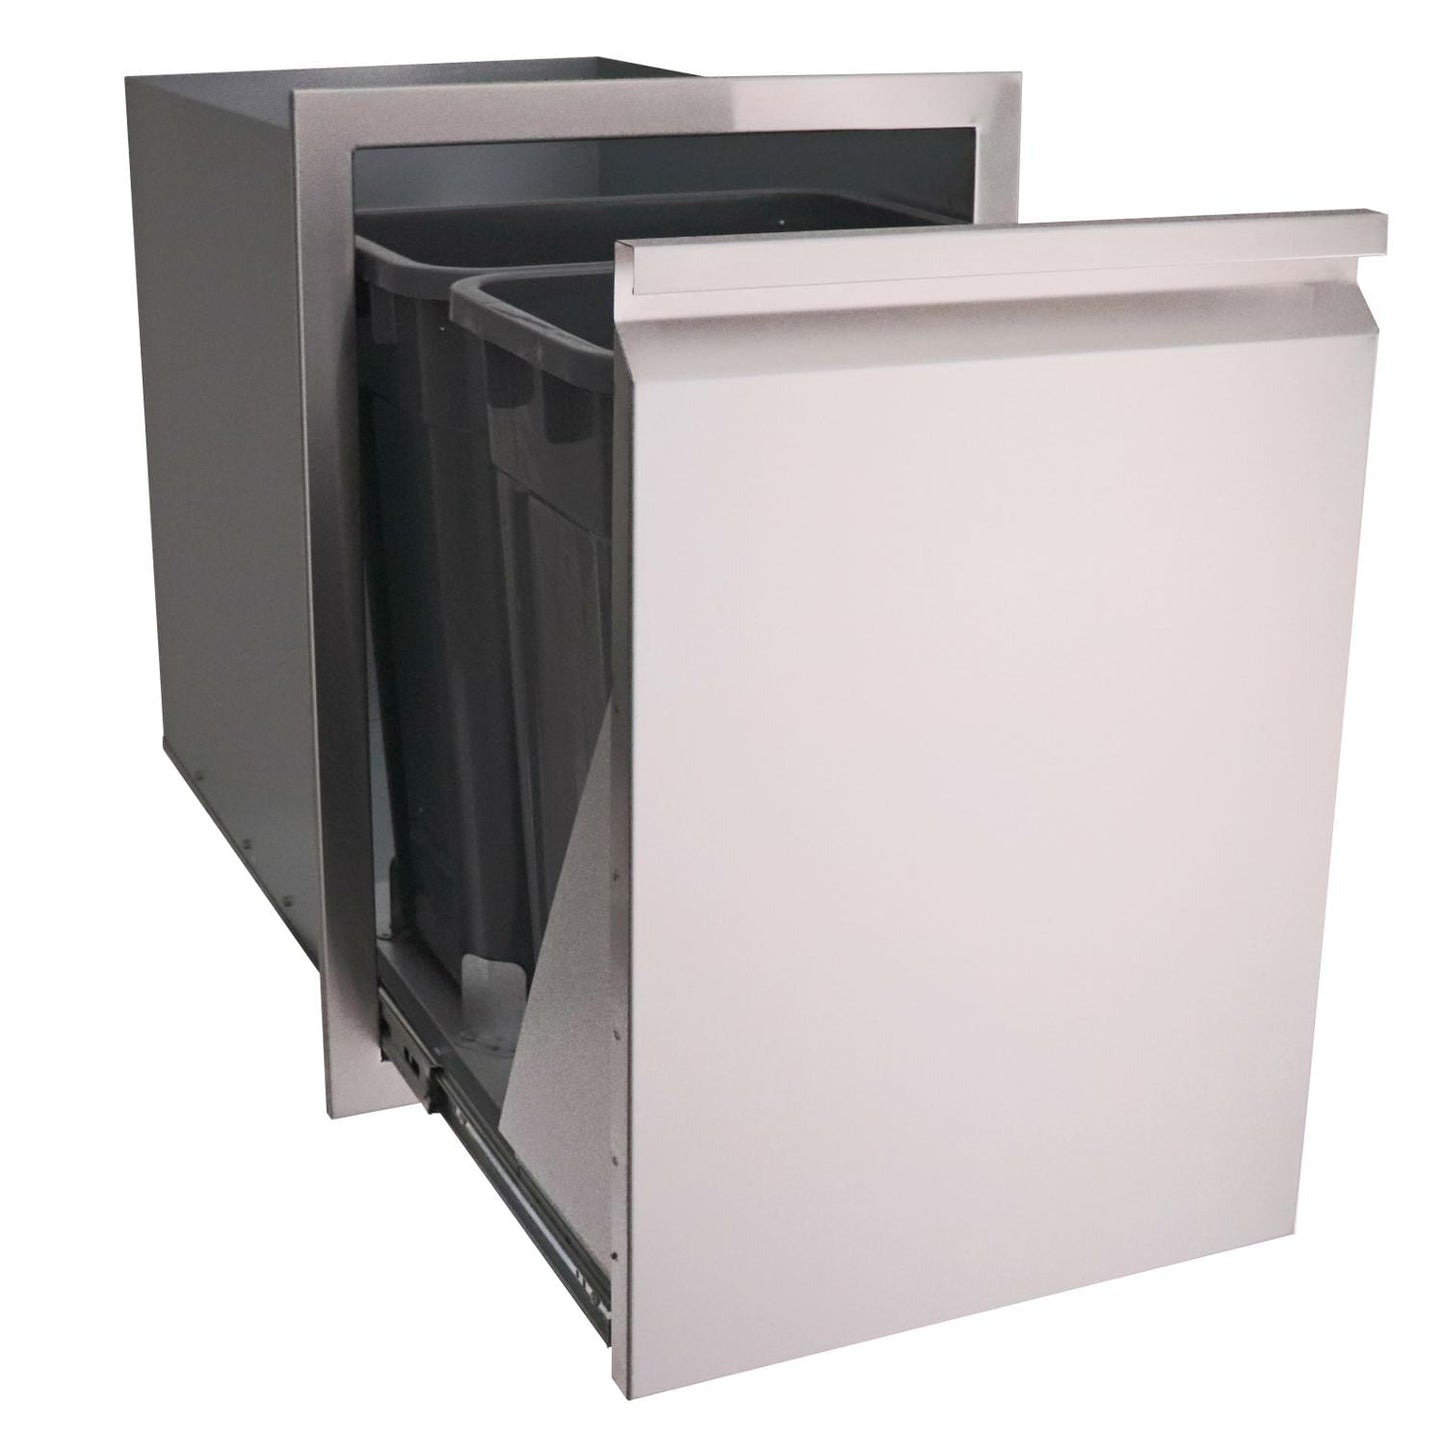 RCS Valiant Series 20-Inch Roll-Out Stainless Steel Double Trash / Recycling Bin - VTD2